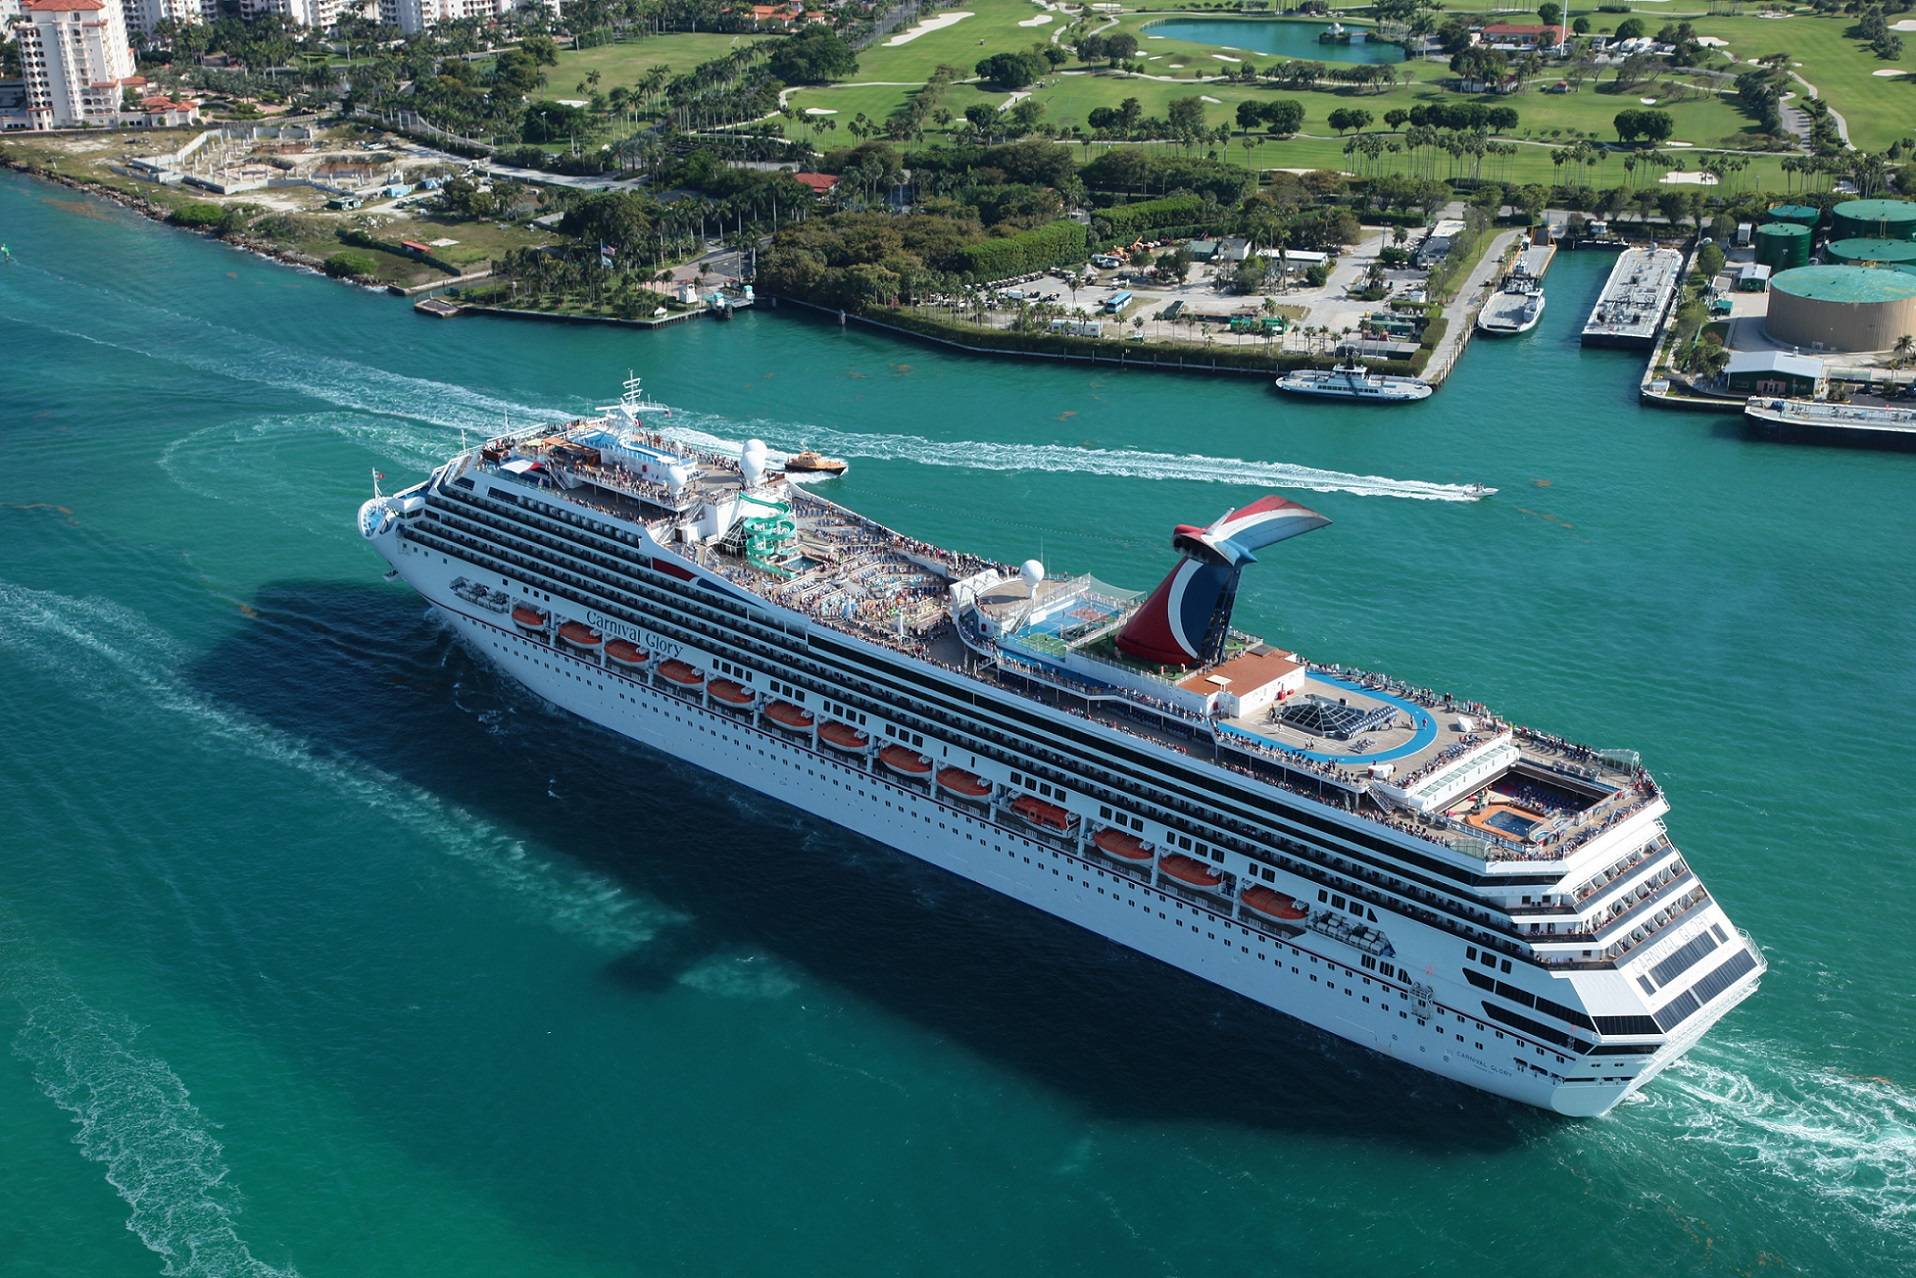 Eastern Caribbean Cruise From New Orleans, Stay During Mardi Gras!!!